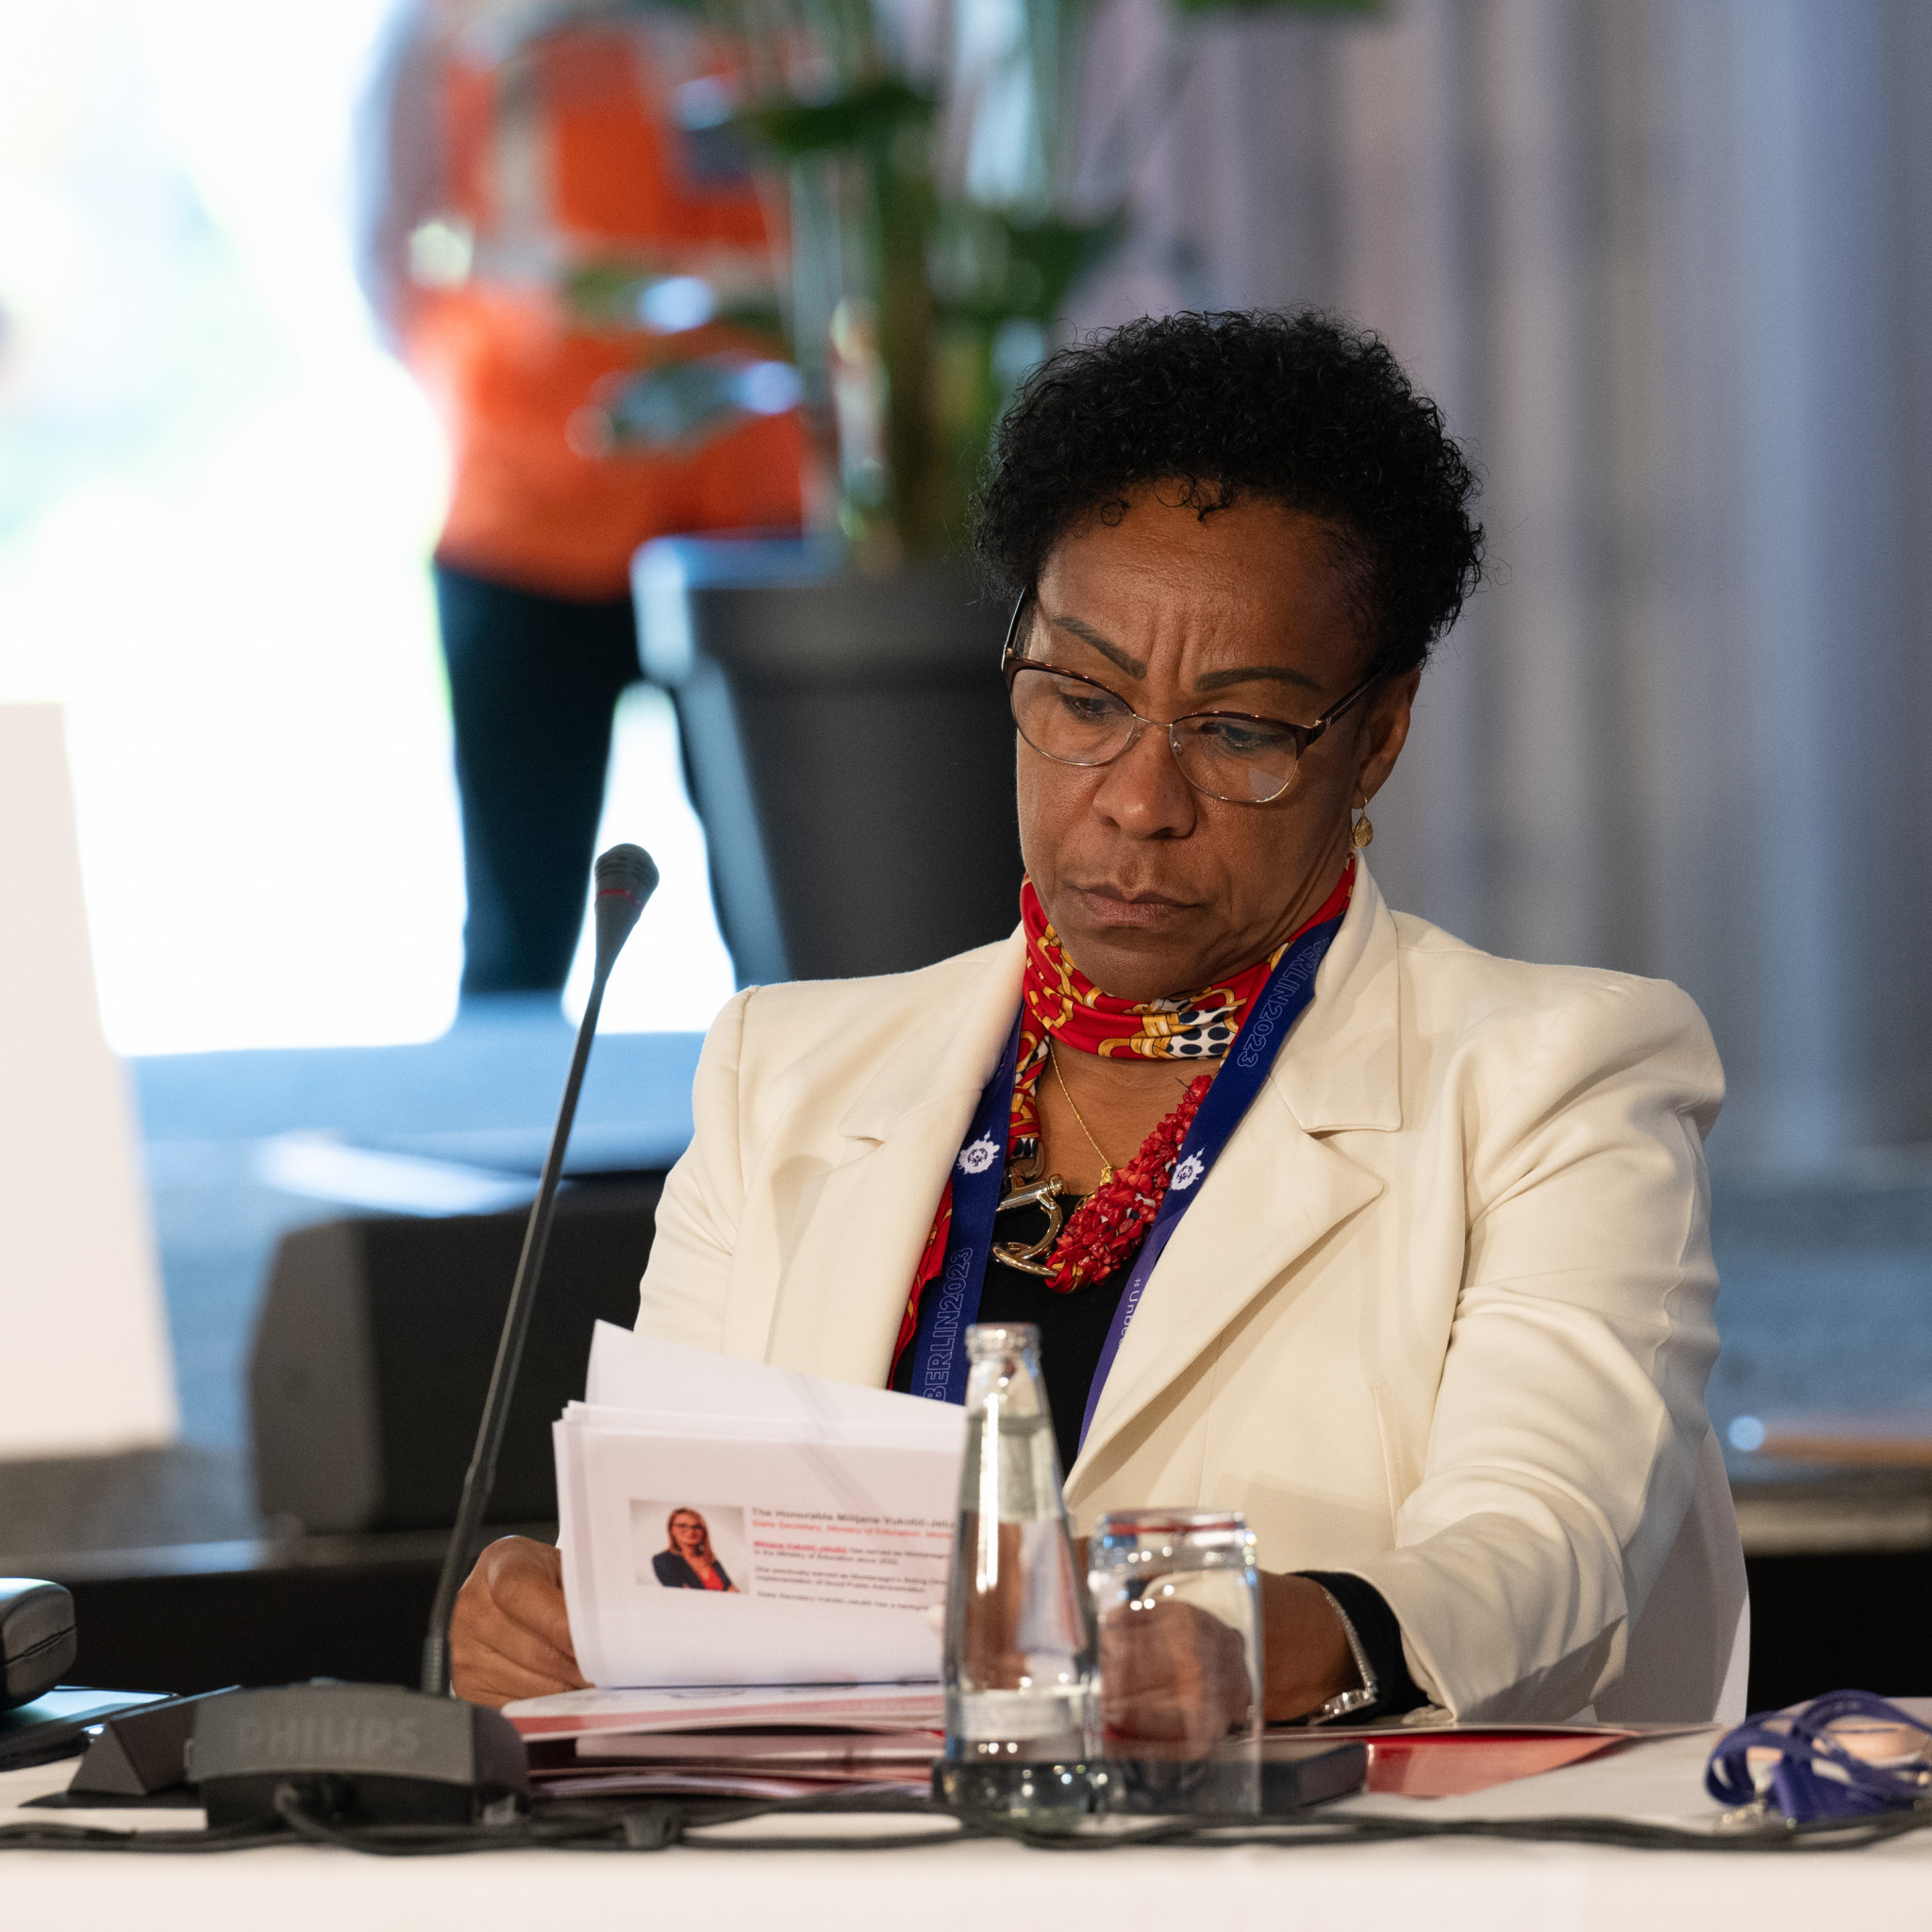 Jamaica was represented by Minister of Culture, Gender, Entertainment and Sport Olivia Grange, who underlined the private sector's role in promoting inclusion ©Ralf Kuckuck/Special Olympics Europe Eurasia